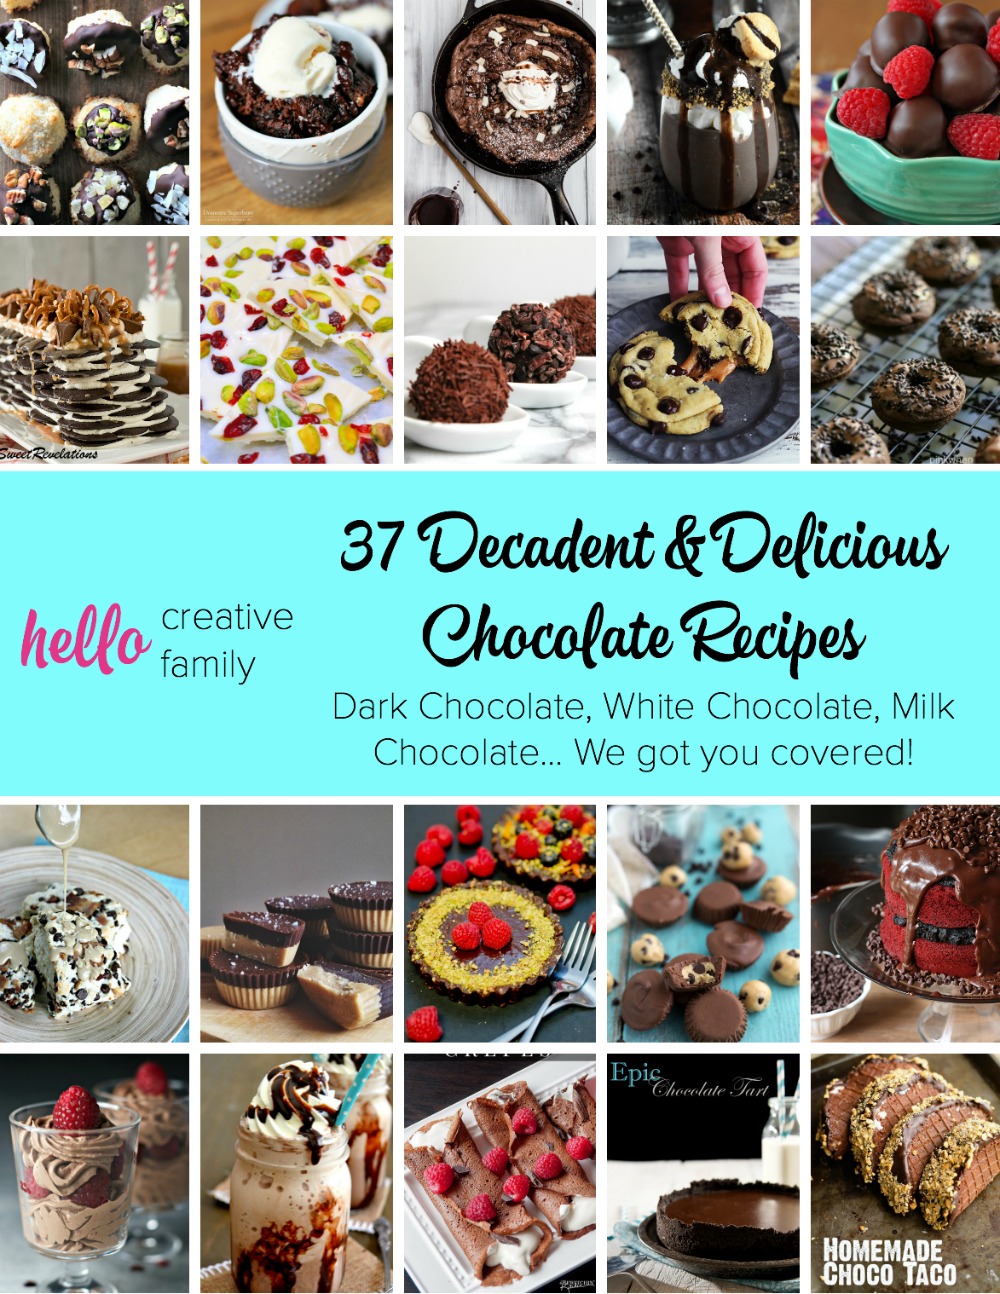 Chocolate is my guilty addiction. I eat, sleep and breath chocolate. This post has so many great chocolate recipes including milkshakes, cocktails, cakes, cookies, ice cream and donuts! Whether your a fan of milk chocolate, dark chocolate or white chocolate there will be chocolate recipes for you in this post! I'll be making #29 this weekend!